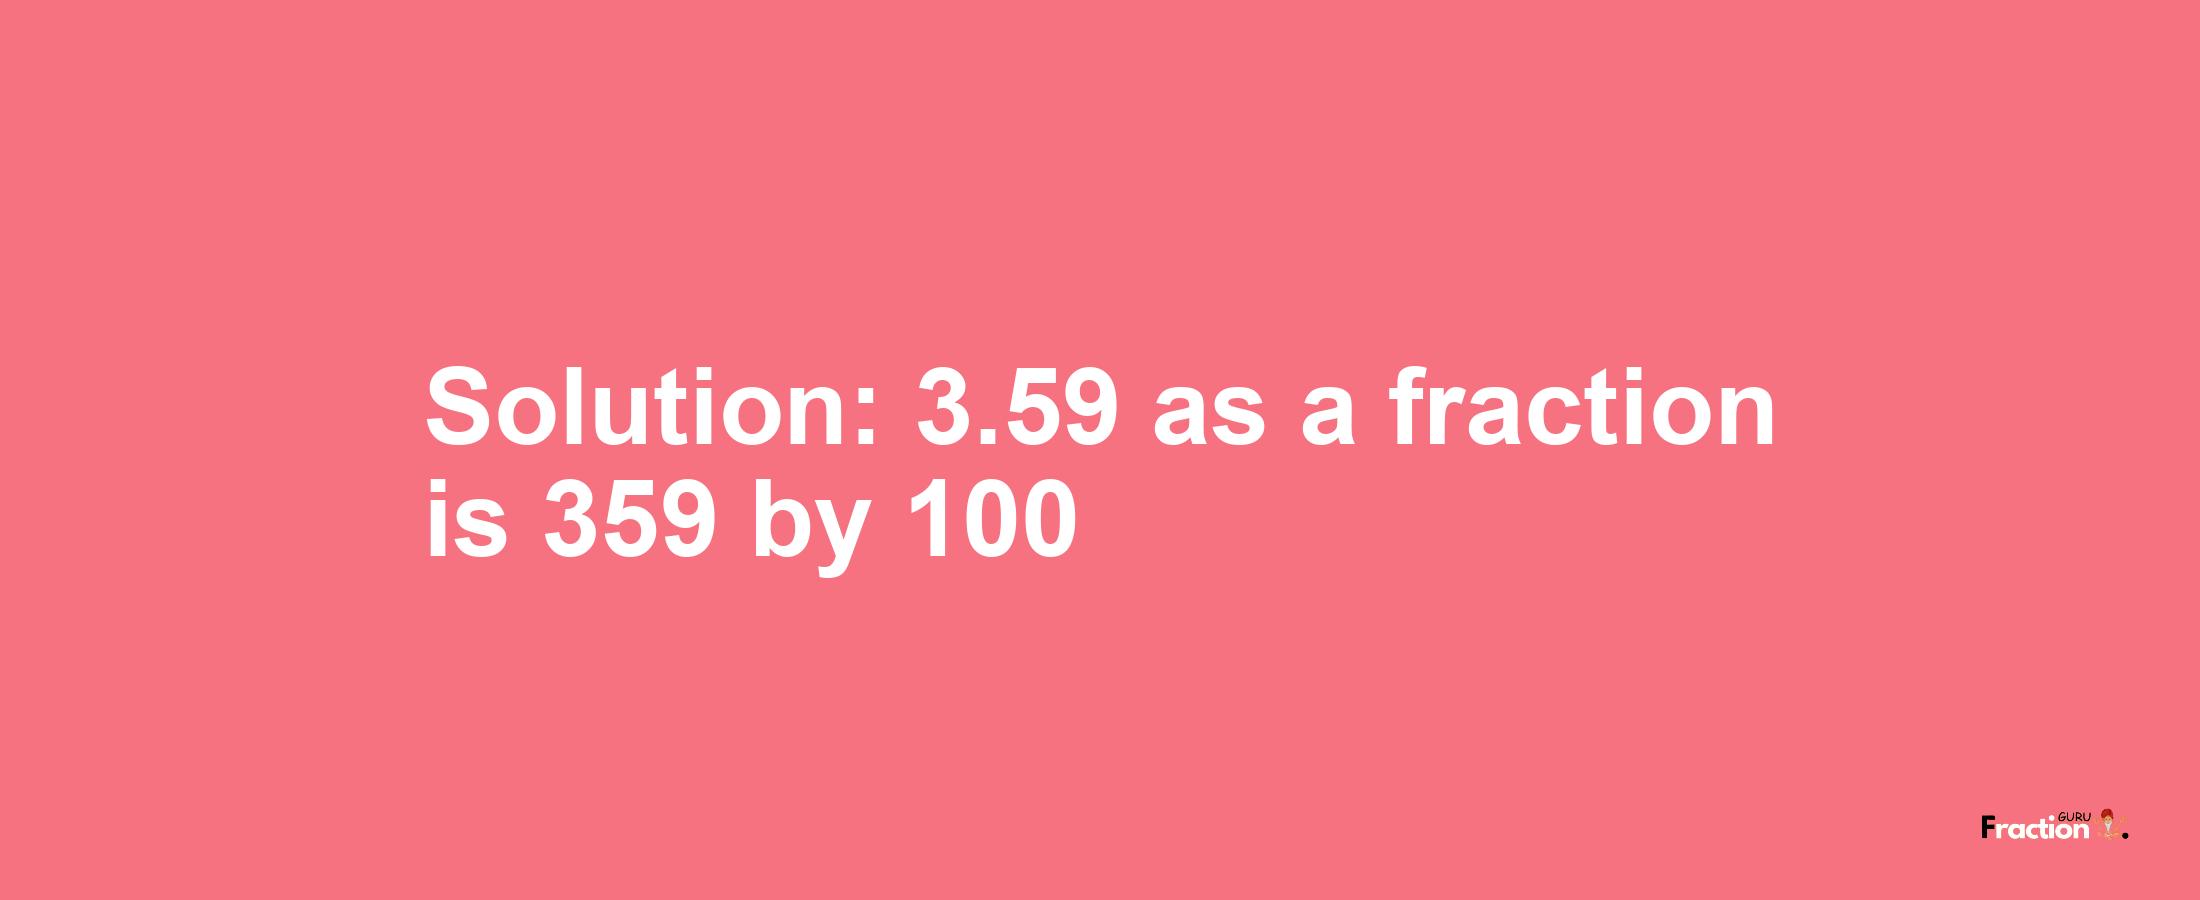 Solution:3.59 as a fraction is 359/100